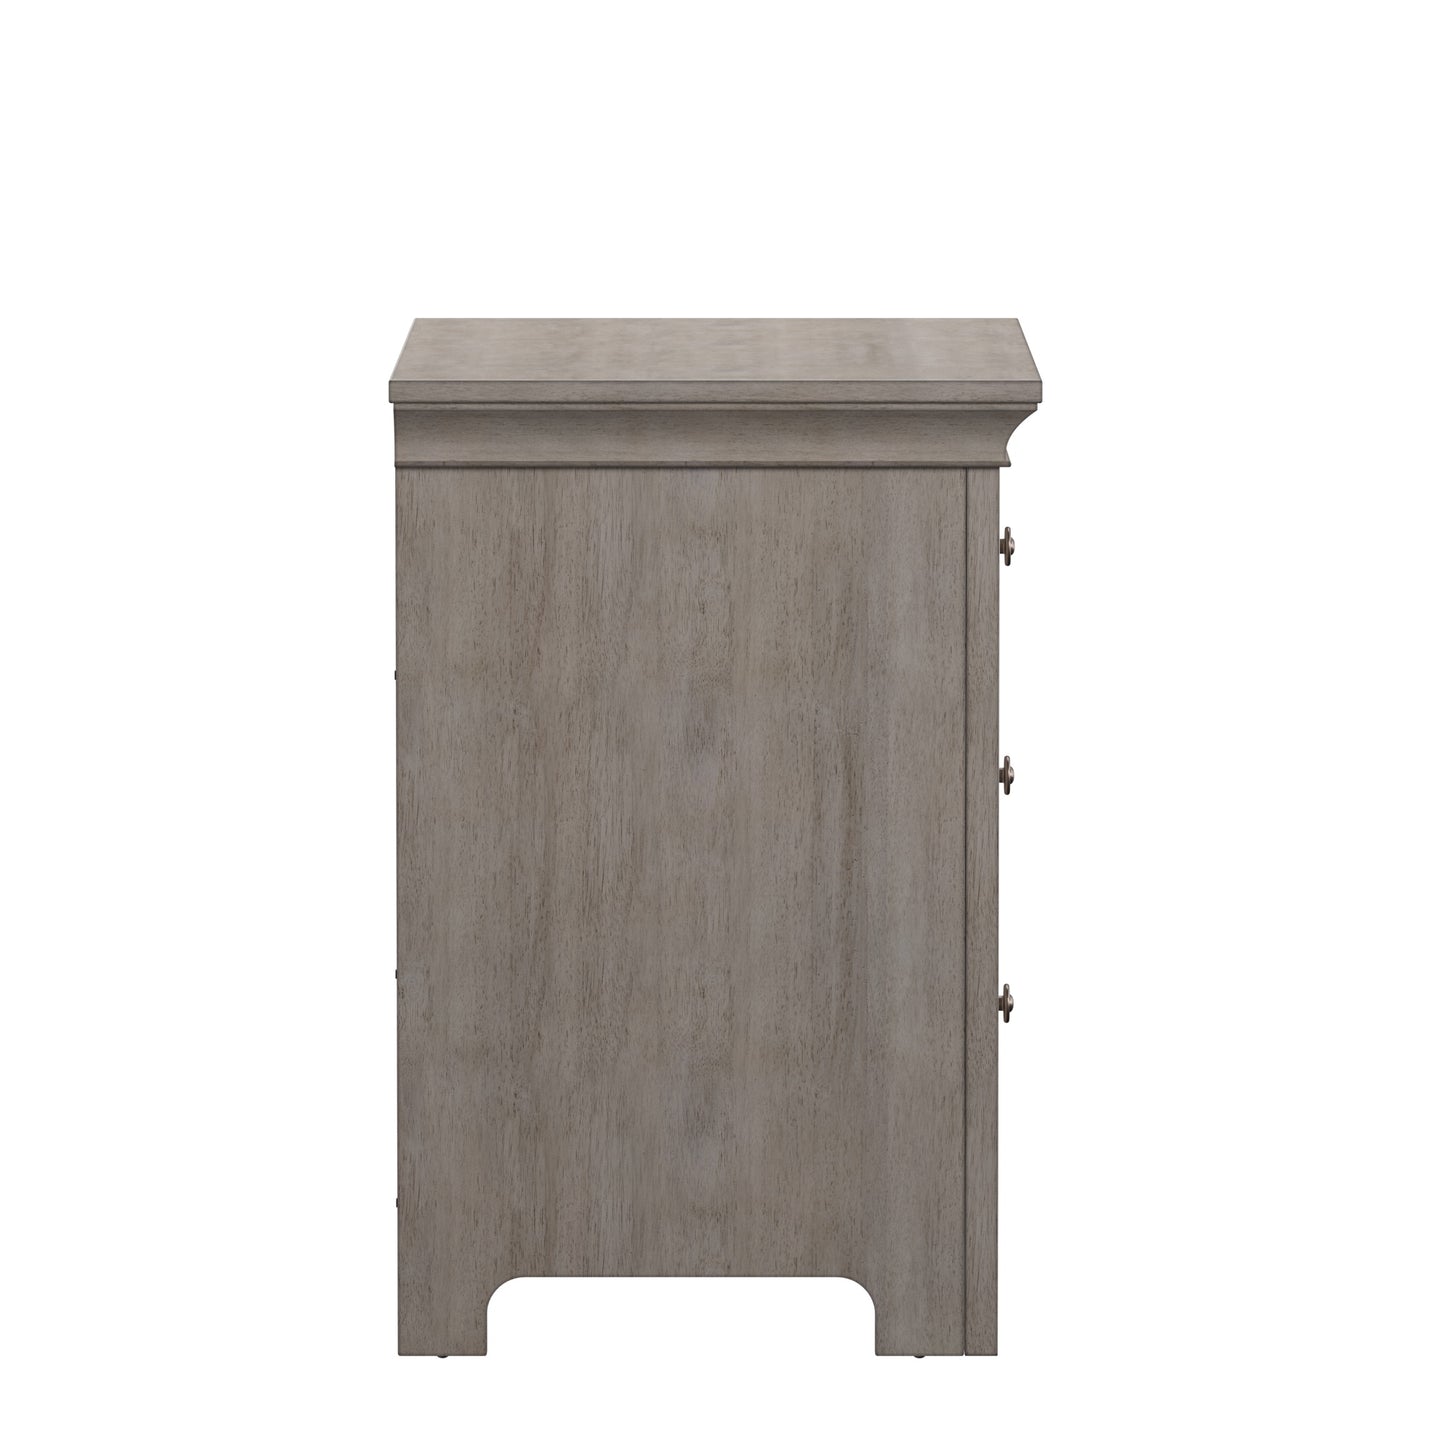 3-Drawer Wood Modular Storage Nightstand with Charging Station - Antique White